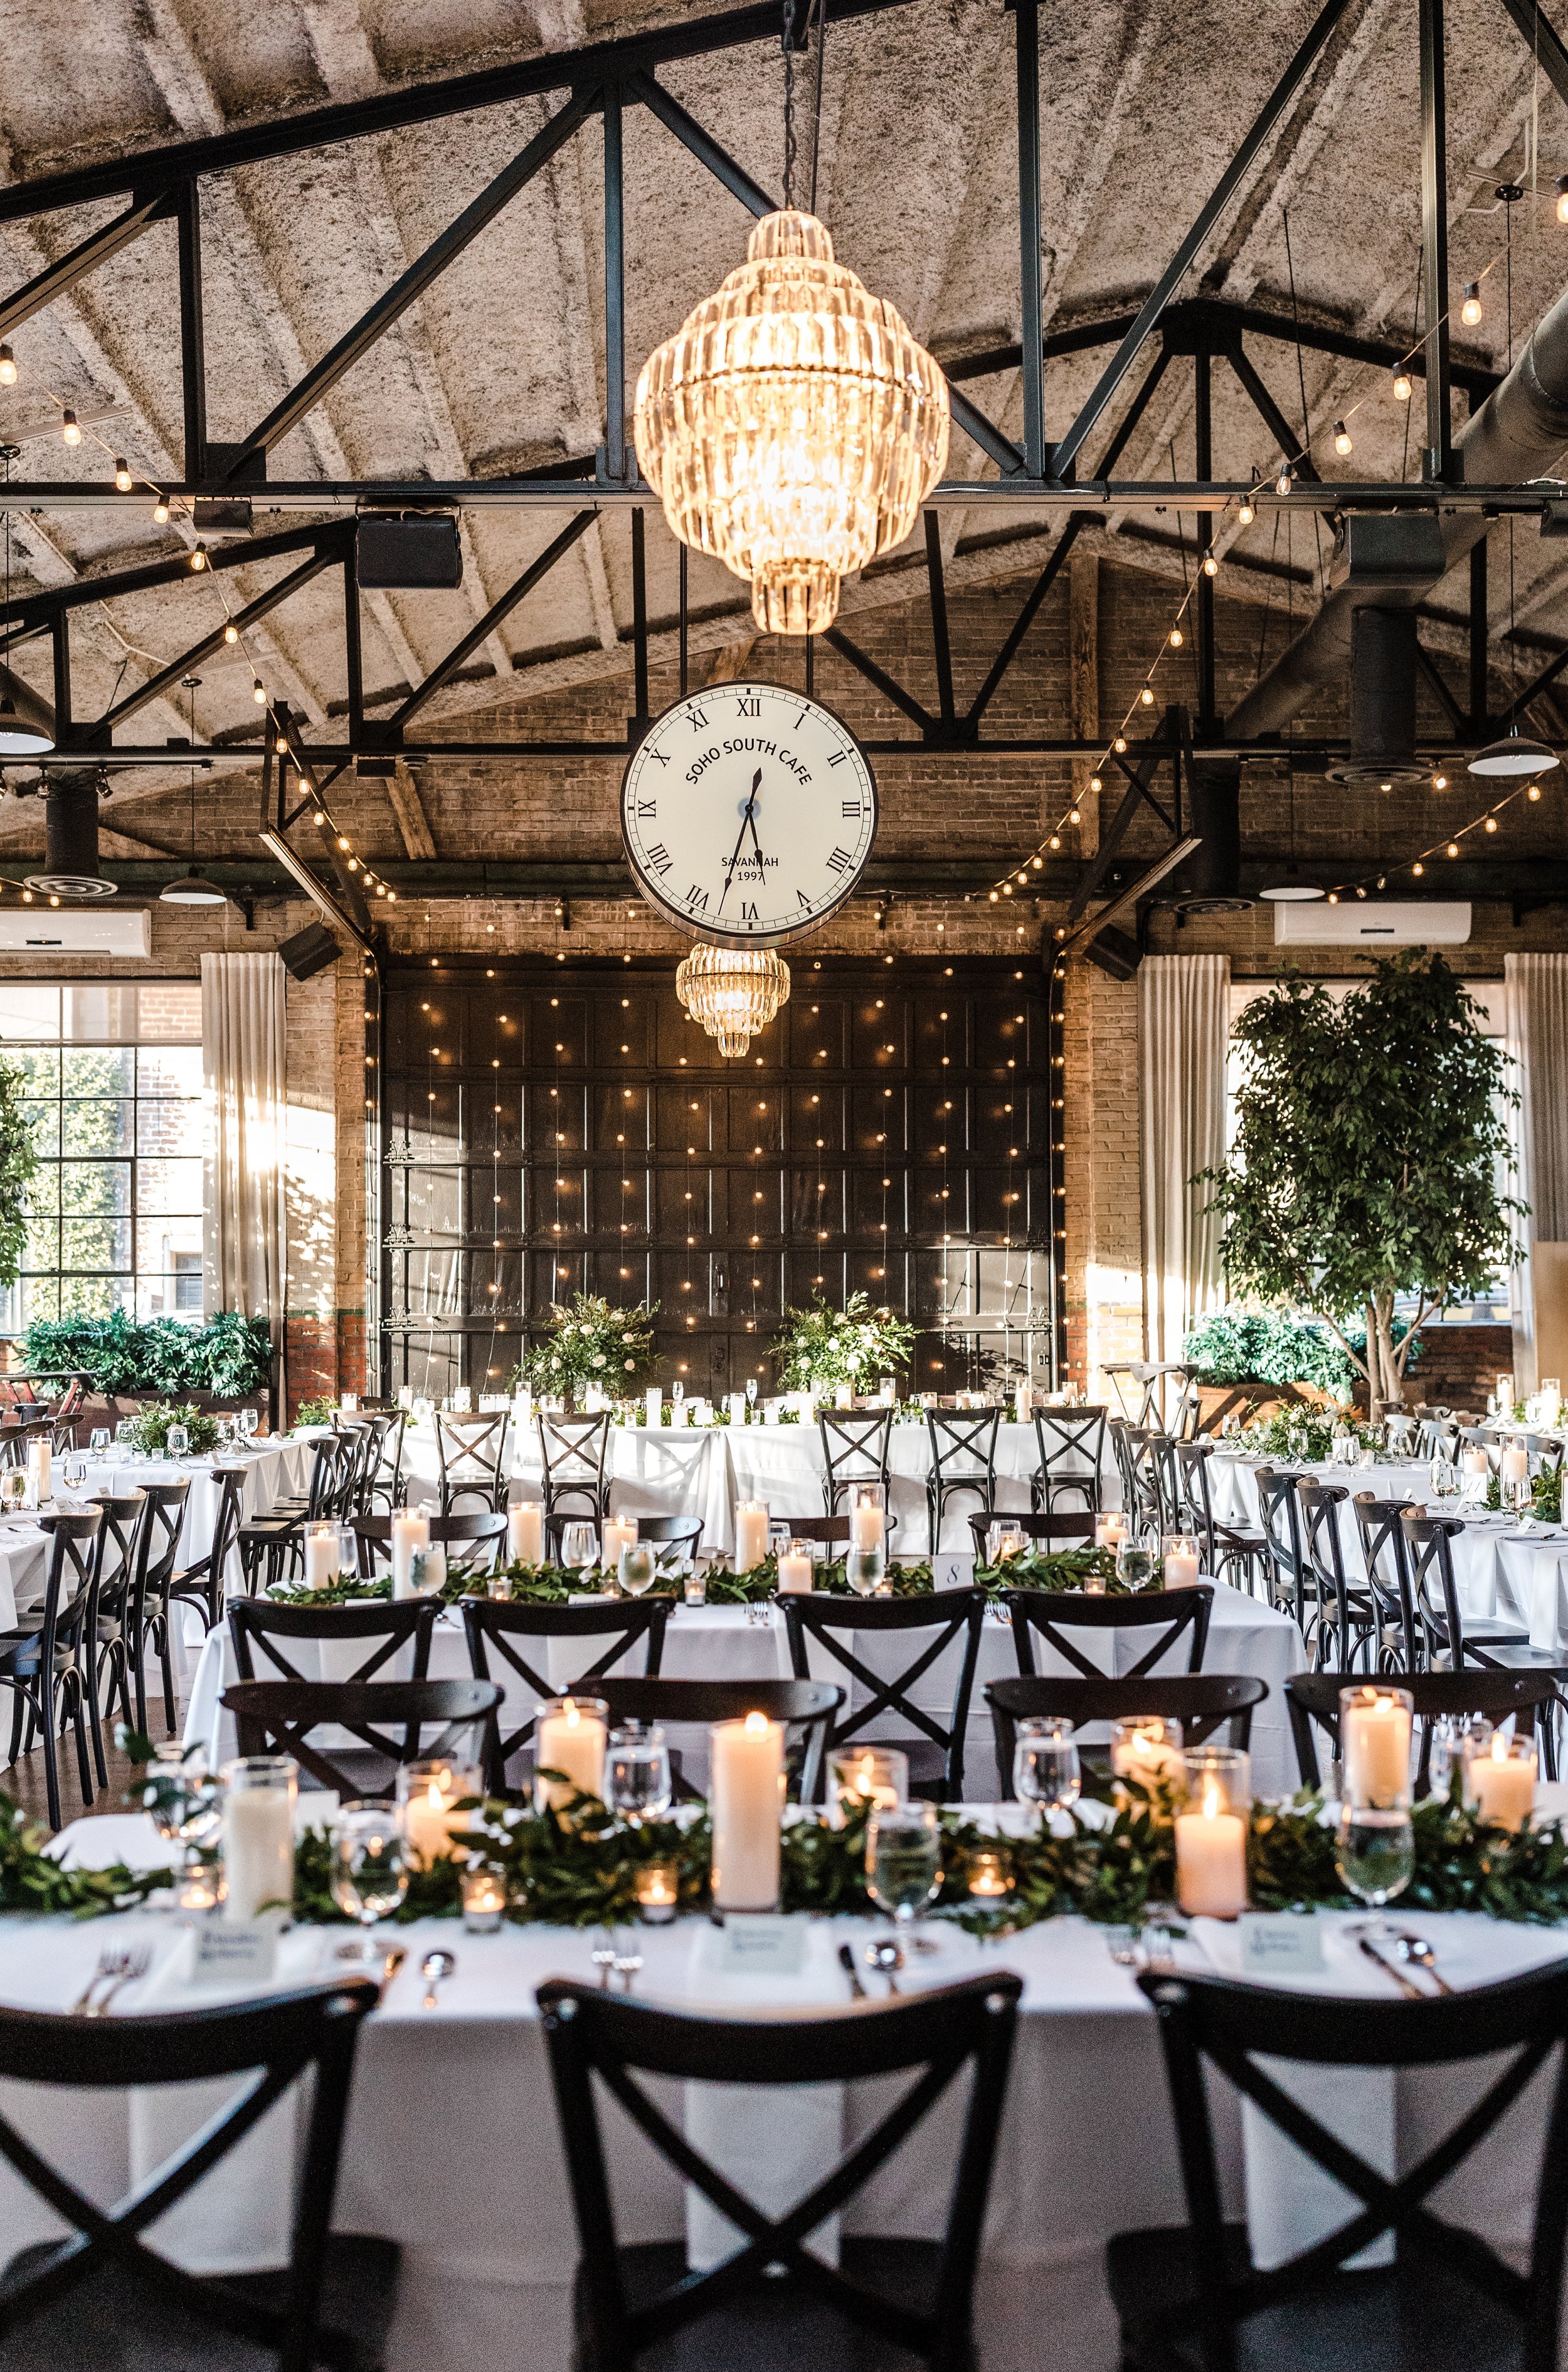 ivory-and-beau-wedding-and-florals-annelise-and-preston-wedding-blog-savannah-wedding-savannah-wedding-coordinator-savannah-florsit-wedding-florist-southern-wedding-forsyth-park-fountain-soho-south-savannah-wedding-gmp20199345-696.jpg